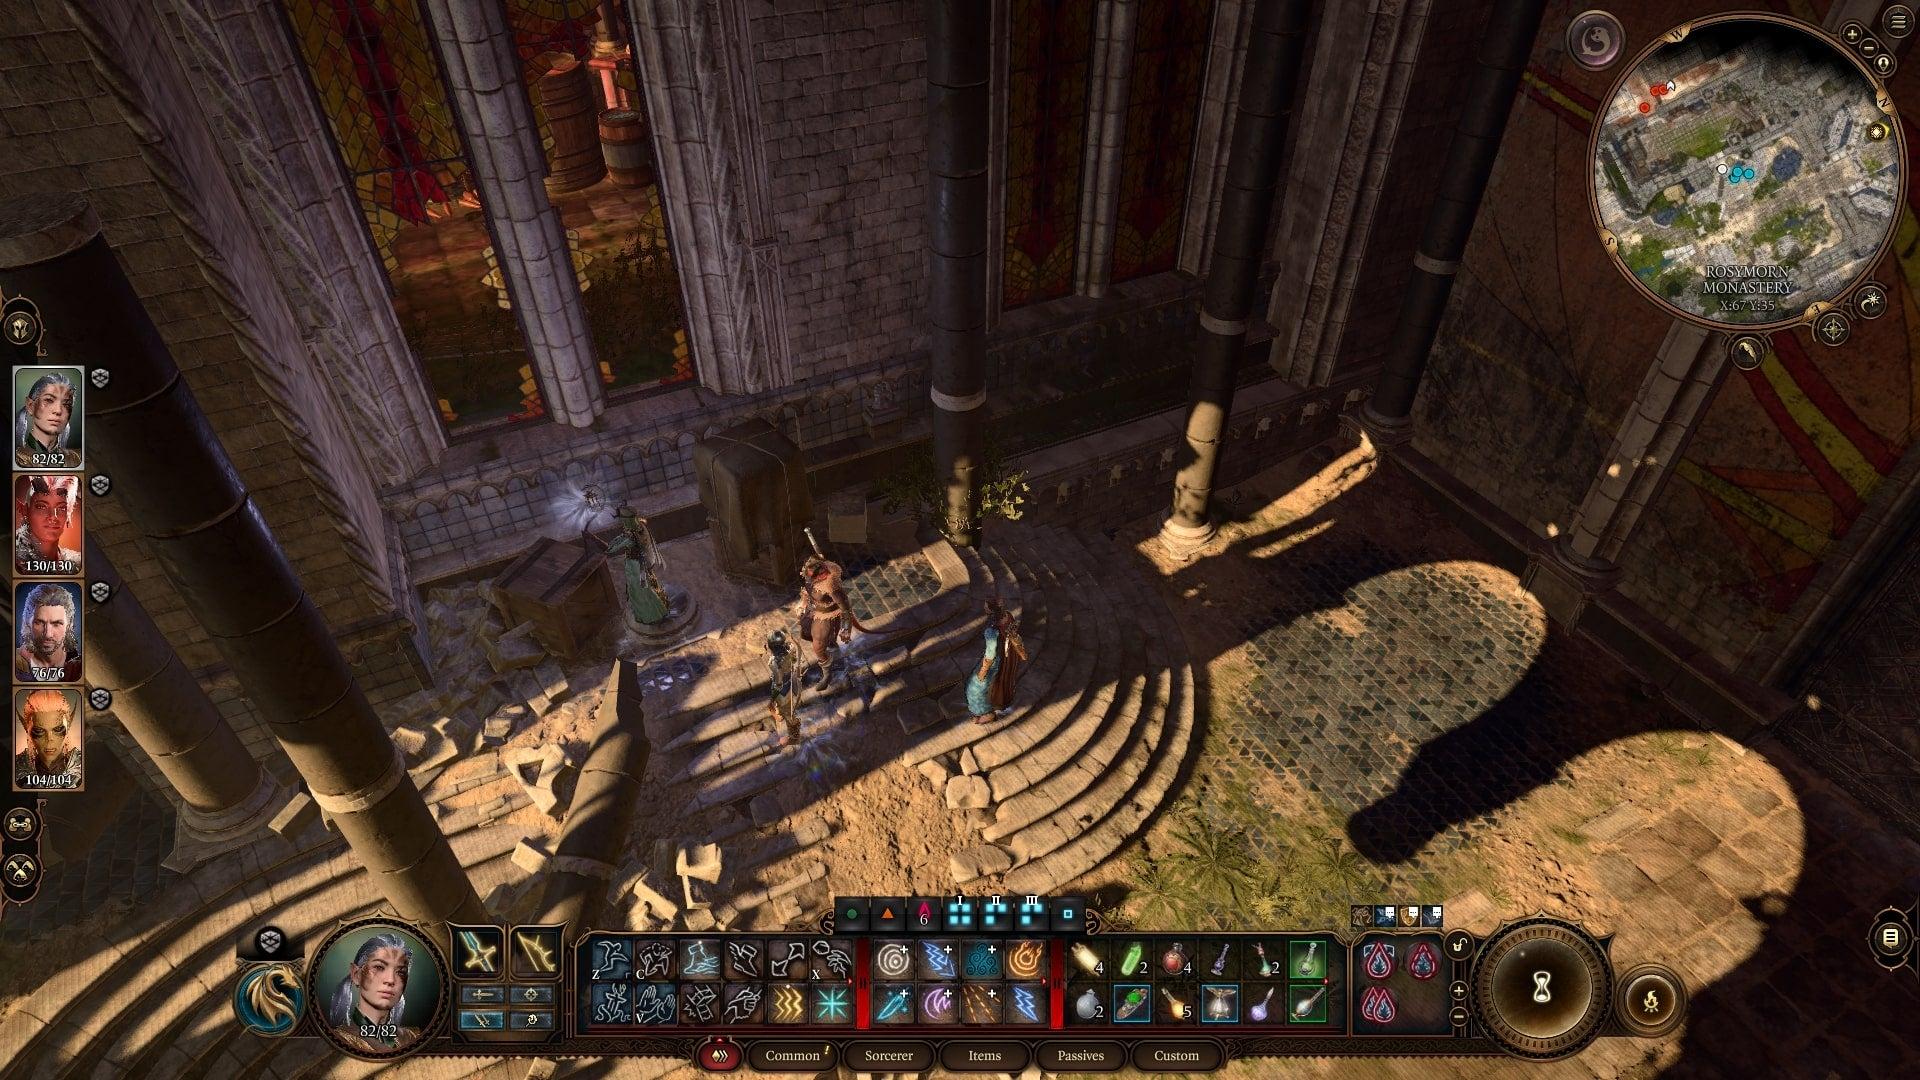 The player party stands by a broken window at the entrance of the Rosymorn Monastery in Baldur